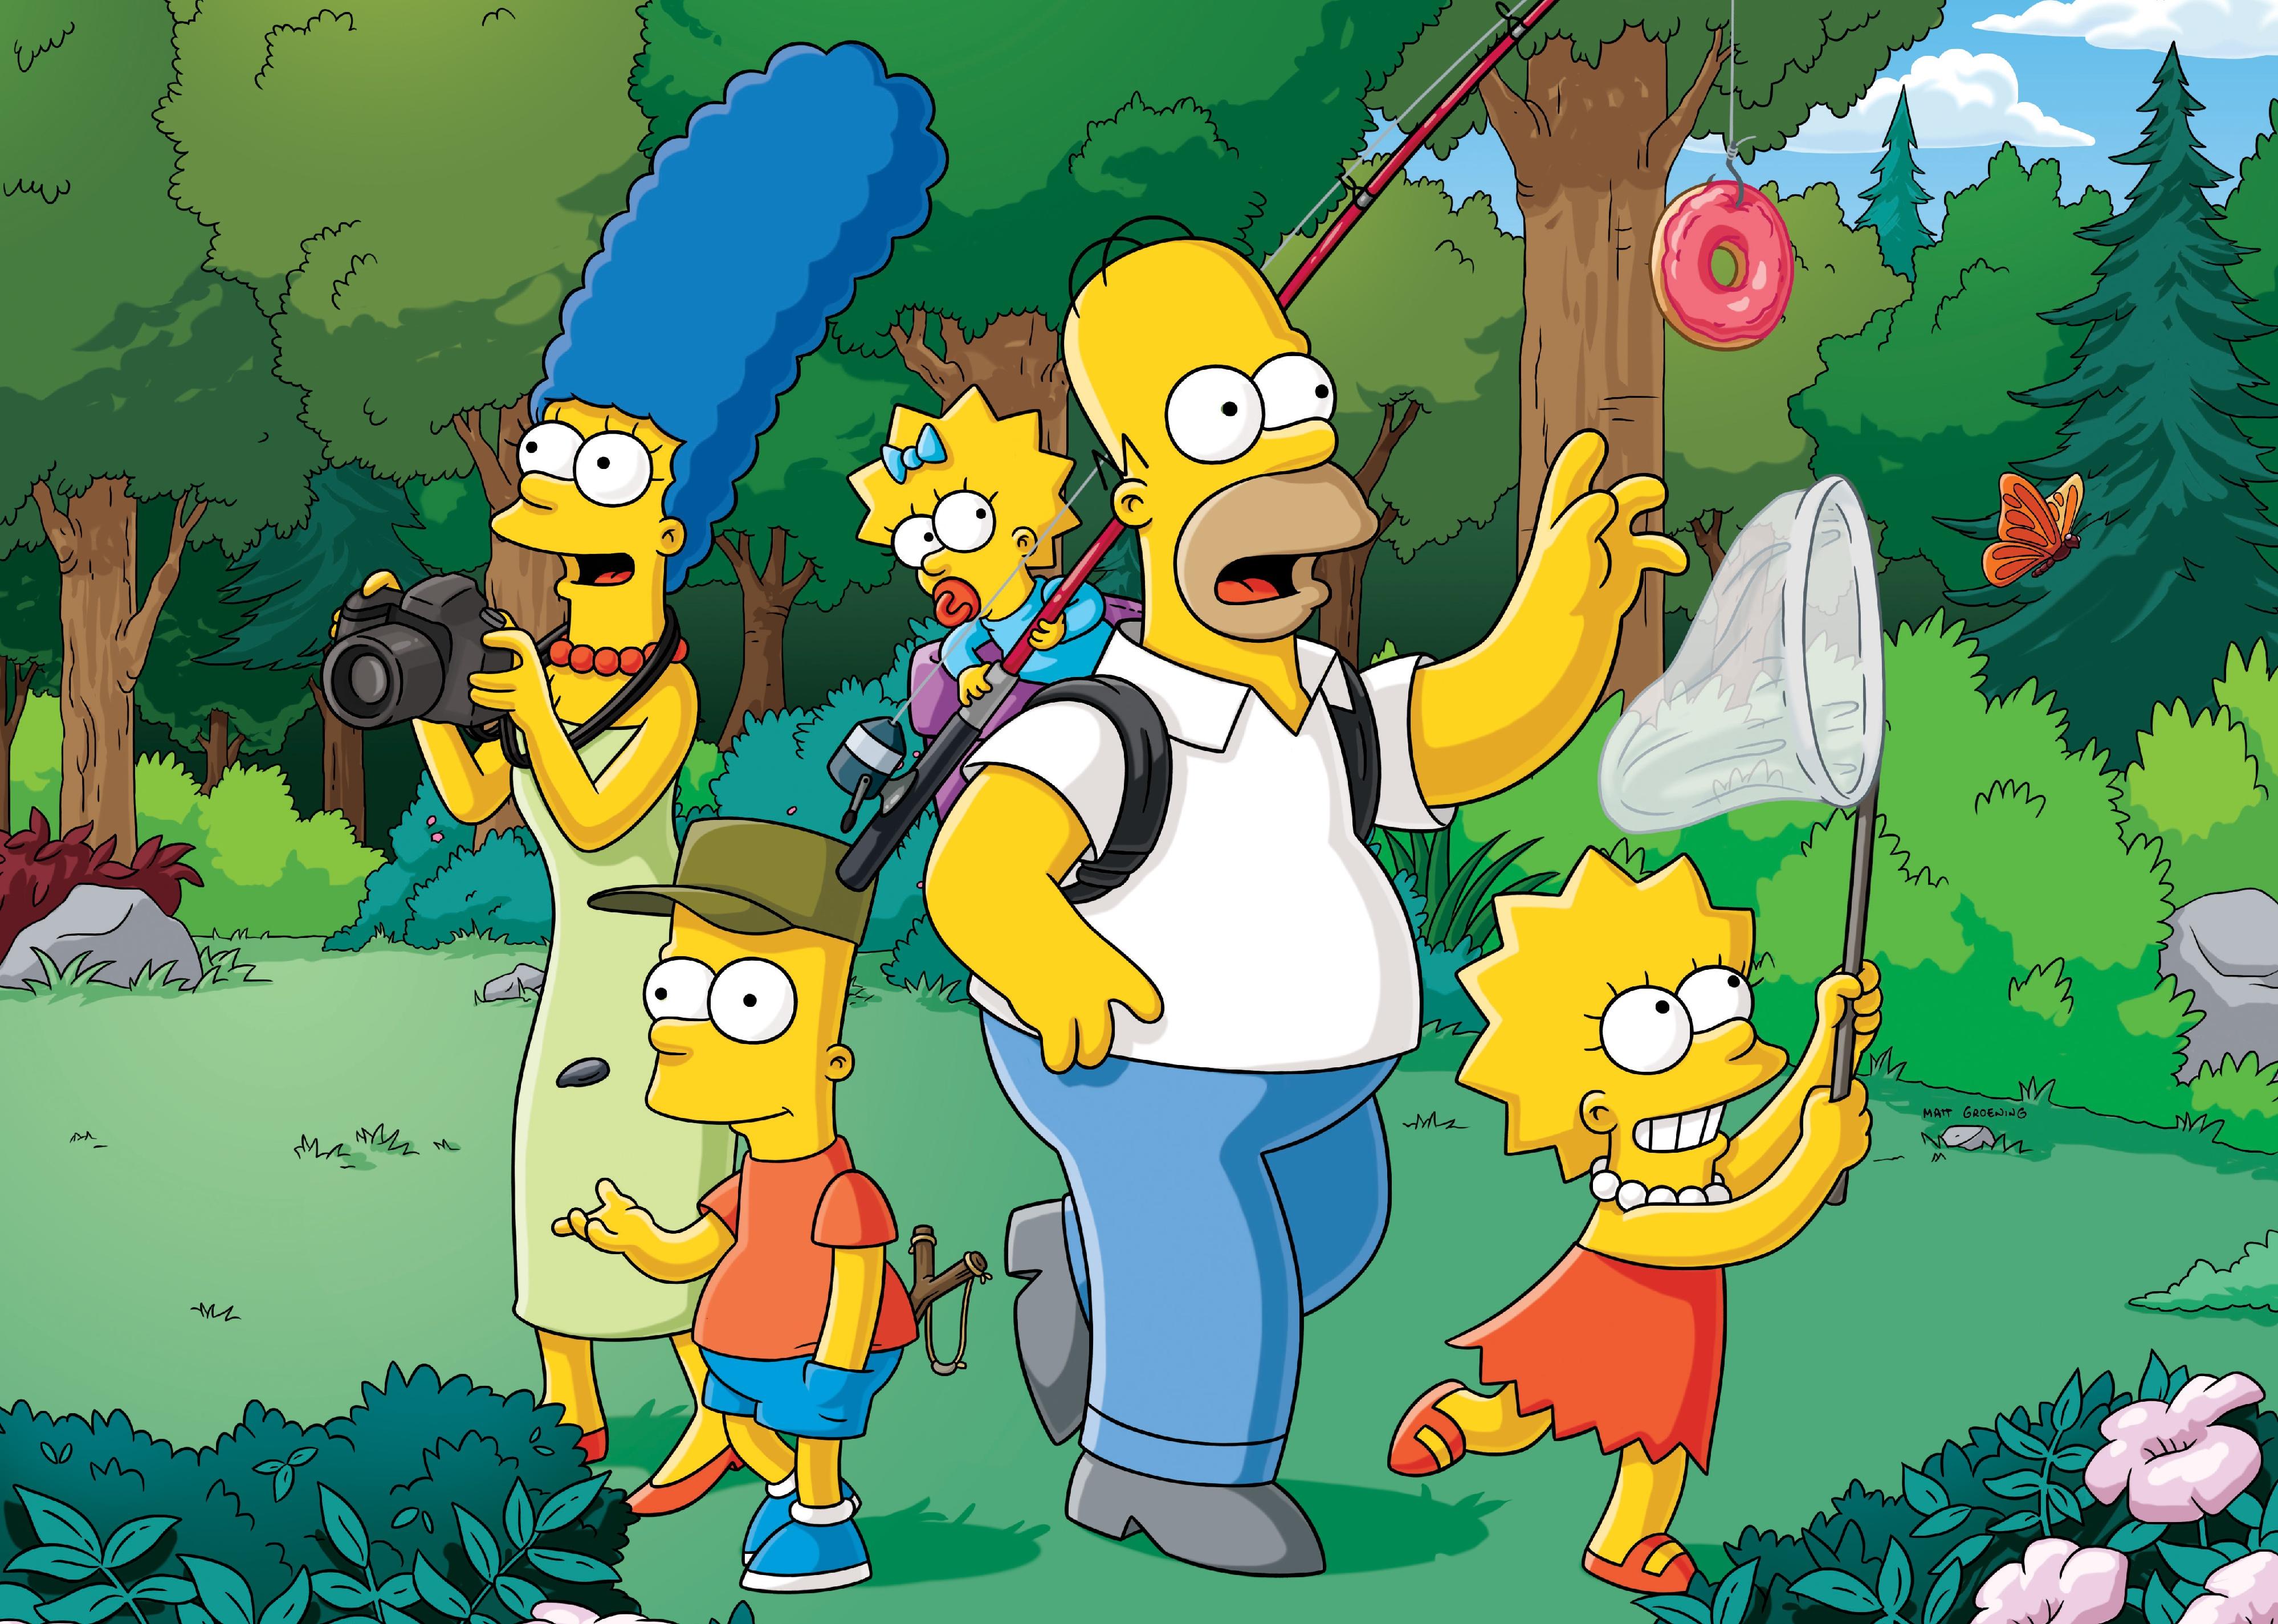 The Simpsons out in nature with baby Maggie holding a fishing pole dangling a donut in front of Homer and Lisa catching butterflies with a net.